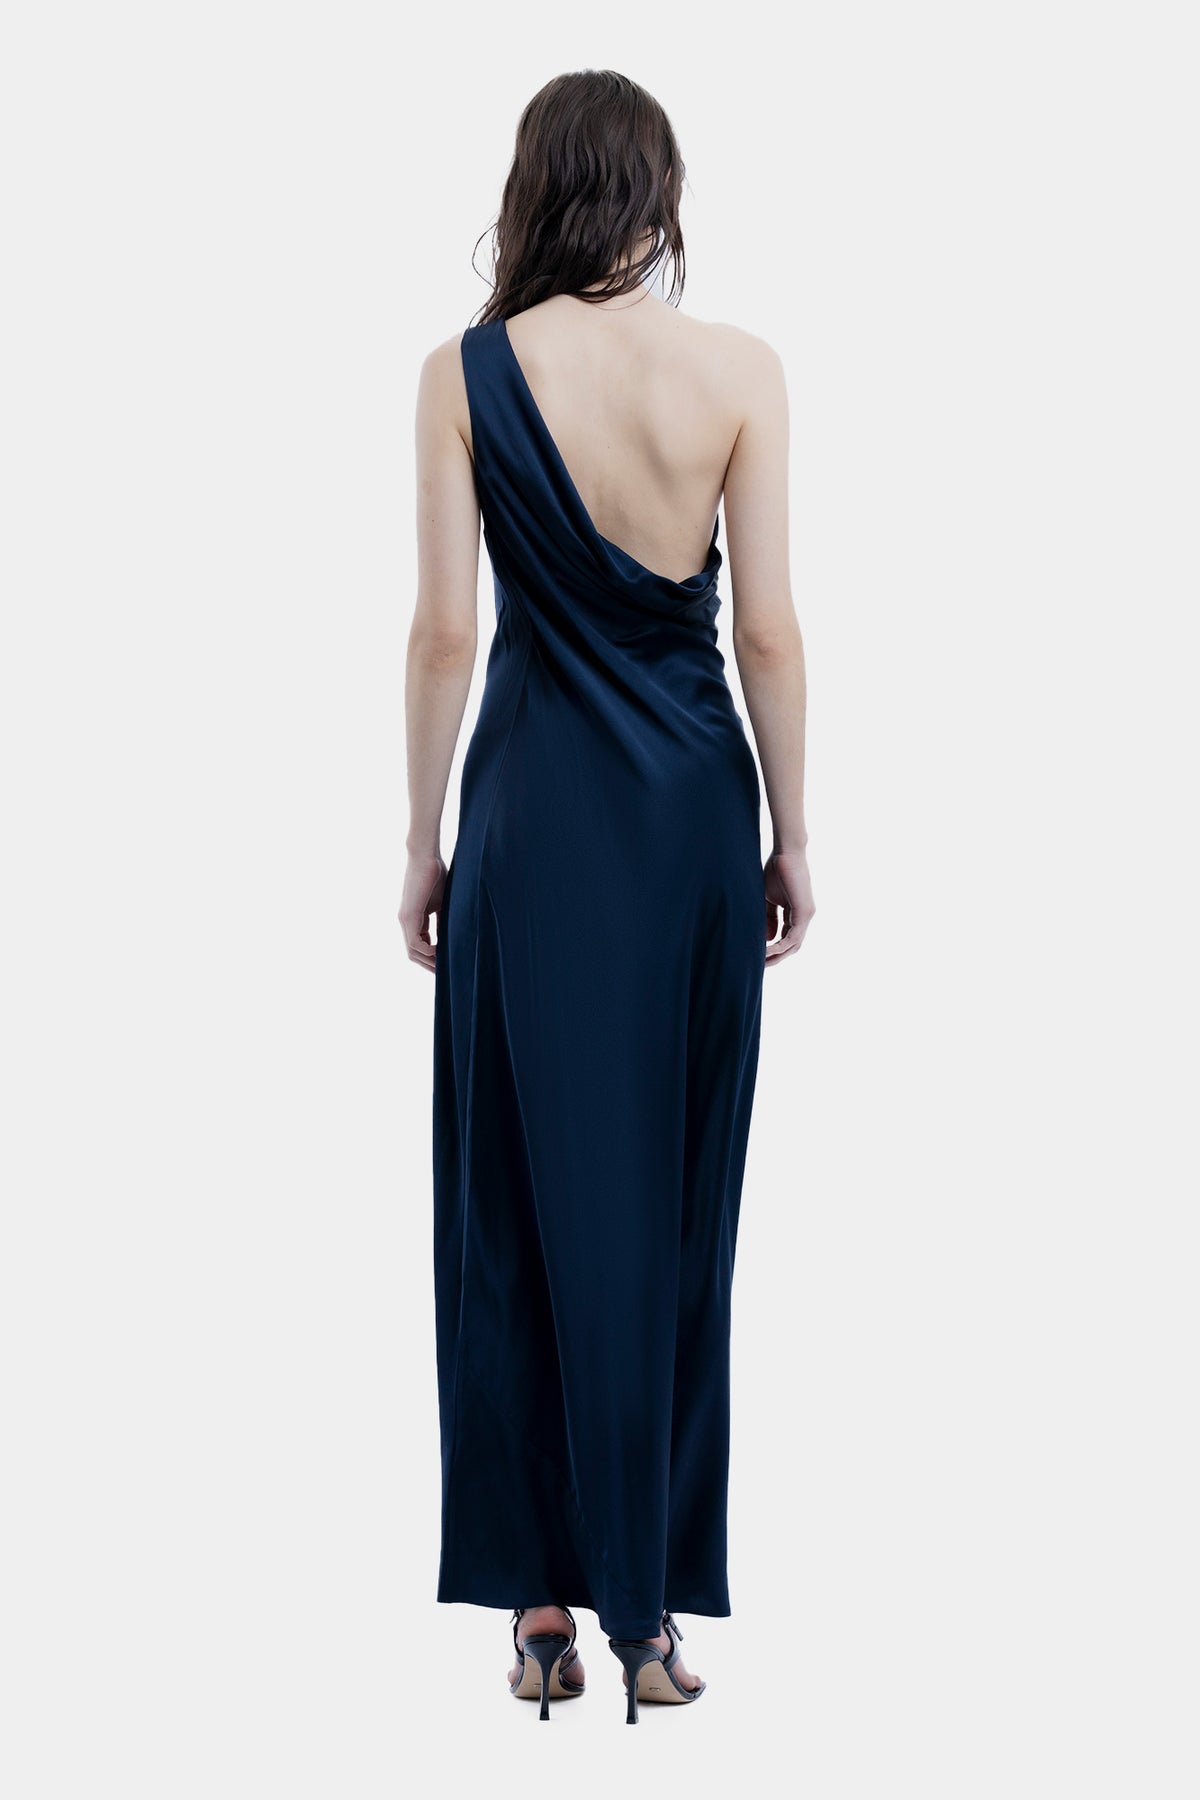 The Asym Cowl Maxi Dress By GINIA In Ink